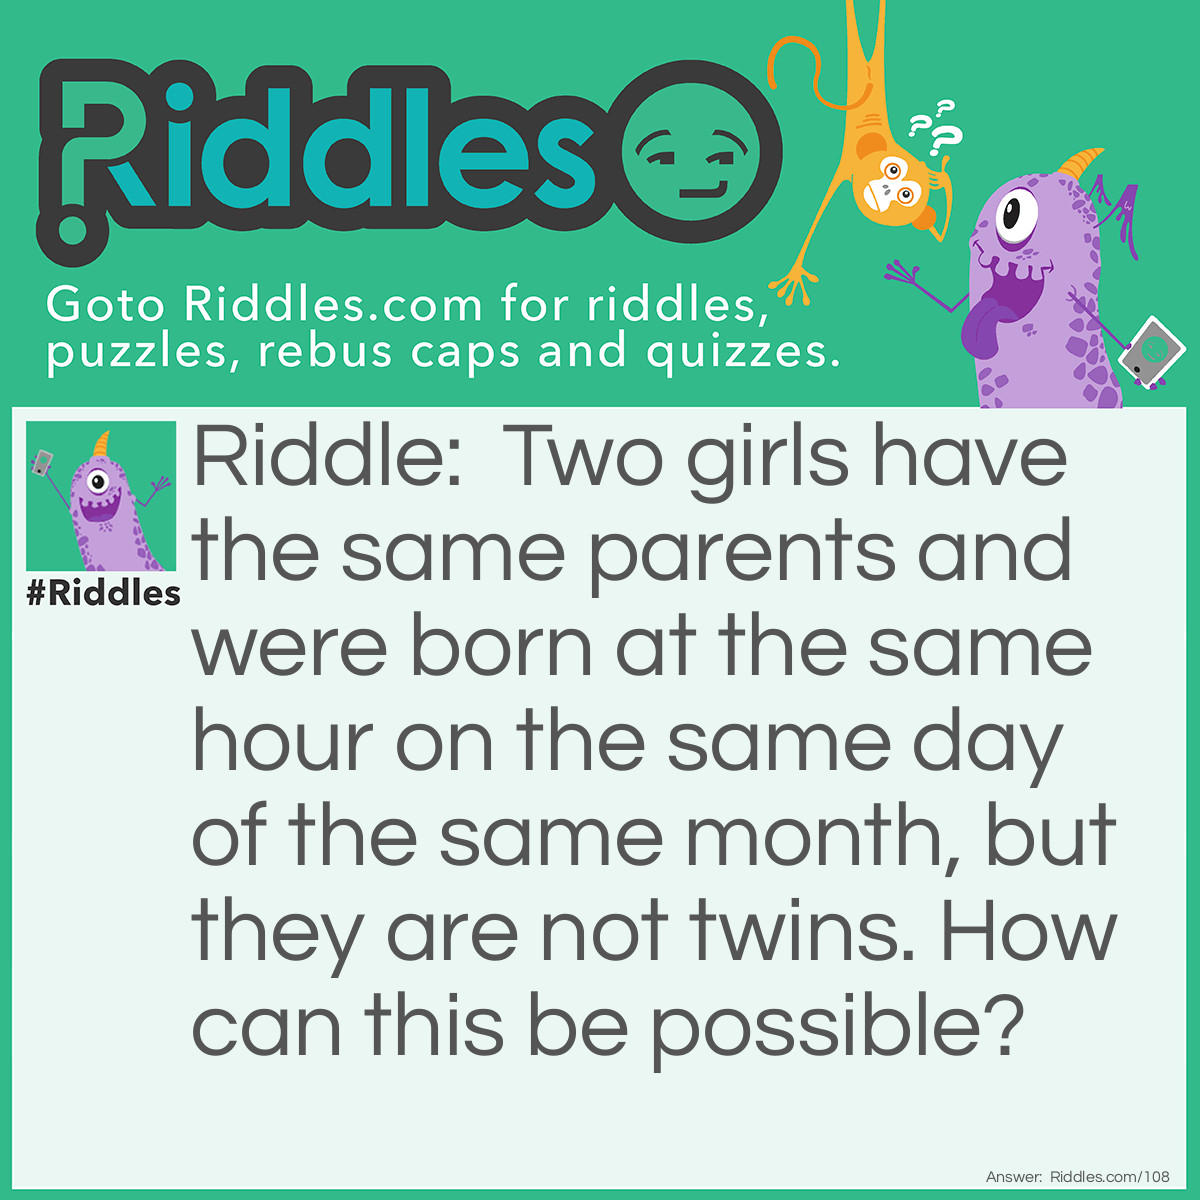 Riddle: Two girls have the same parents and were born at the same hour on the same day of the same month, but they are not twins. How can this be possible? Answer: They were not born in the same year.